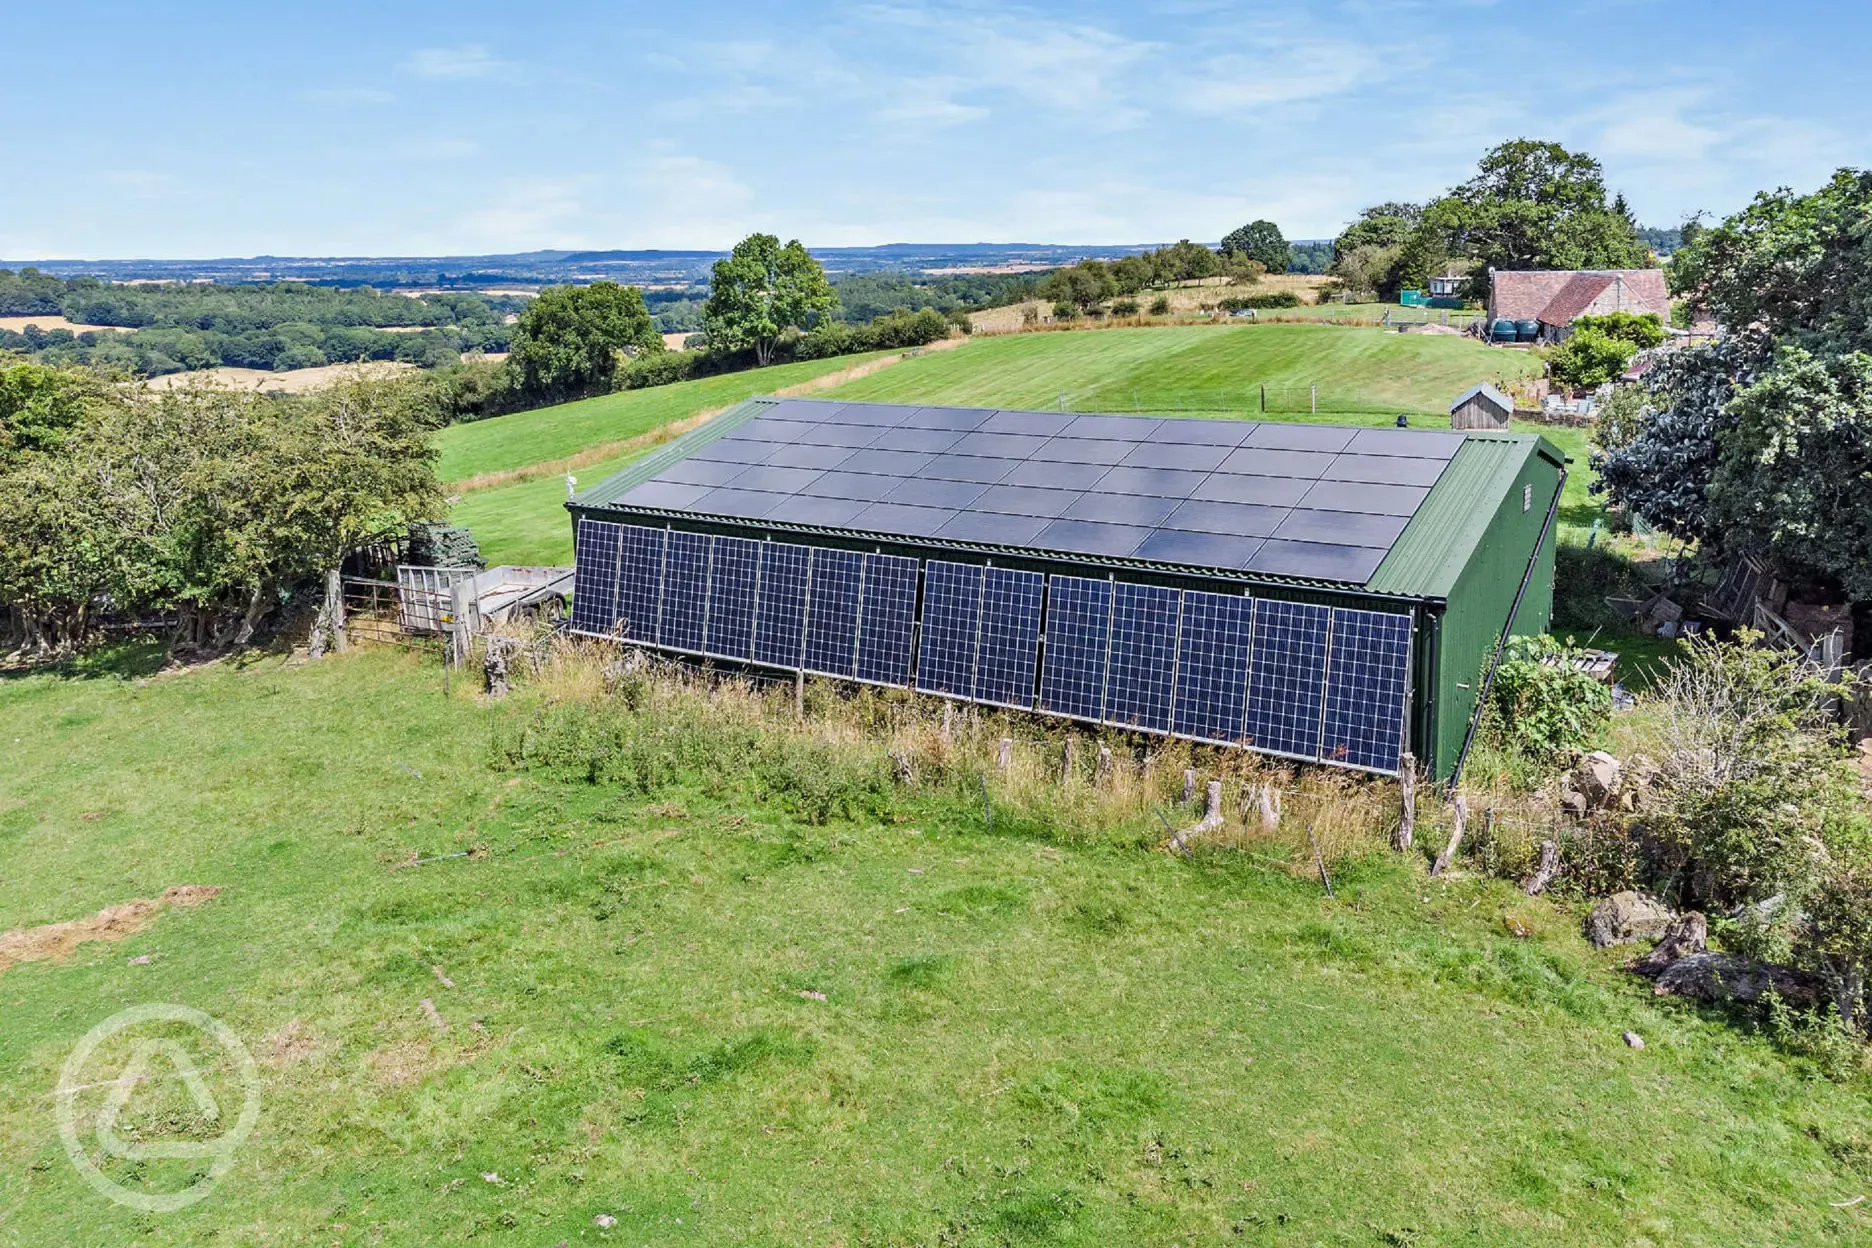 The Solar Barn generating our electricity